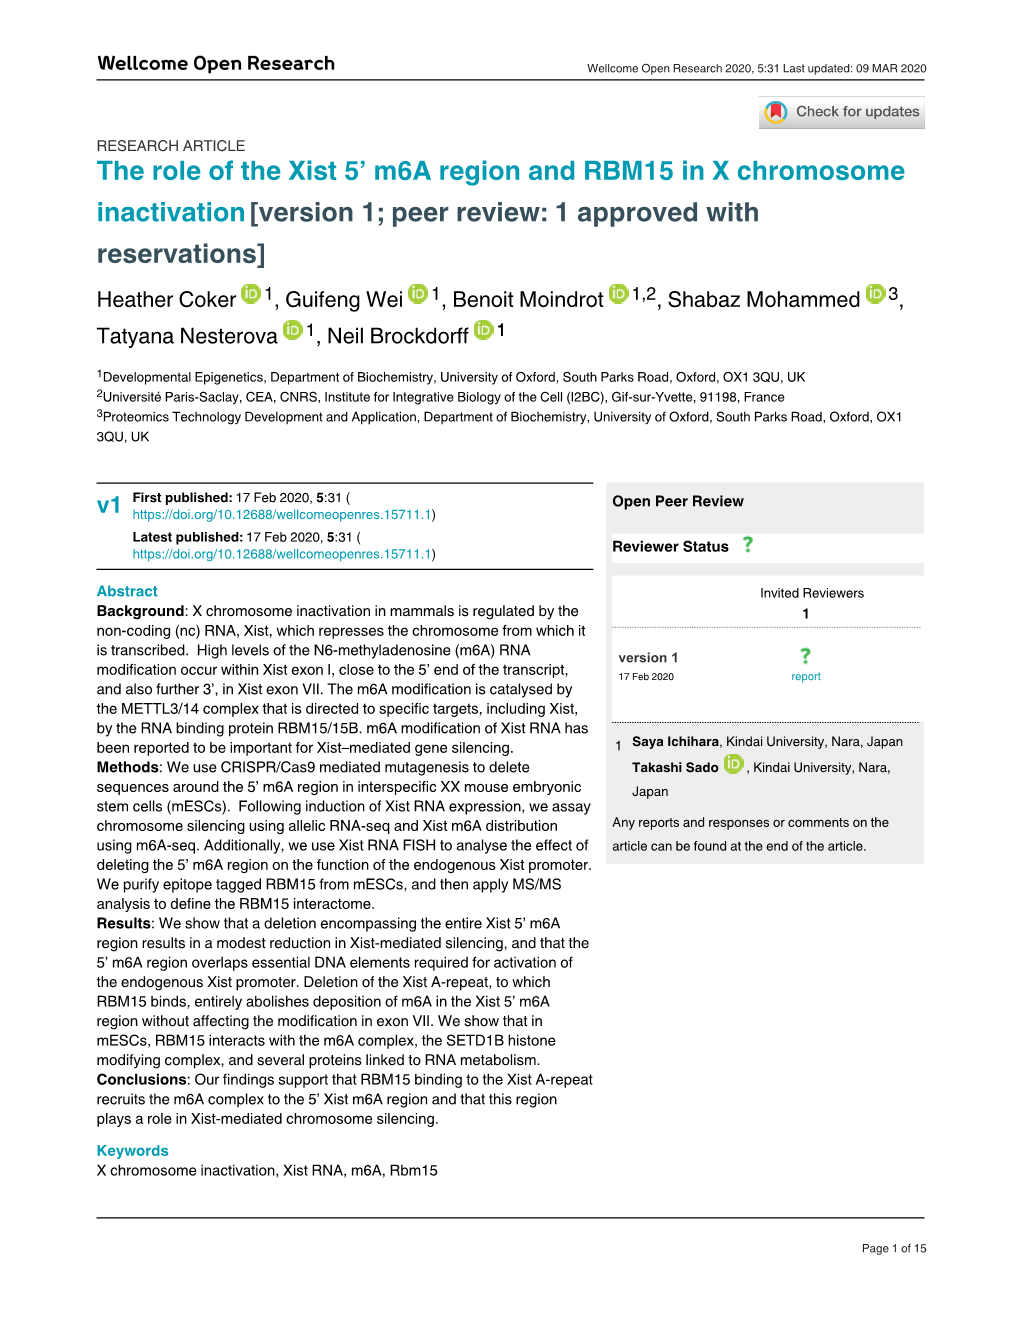 The Role of the Xist 5' M6a Region and RBM15 in X Chromosome